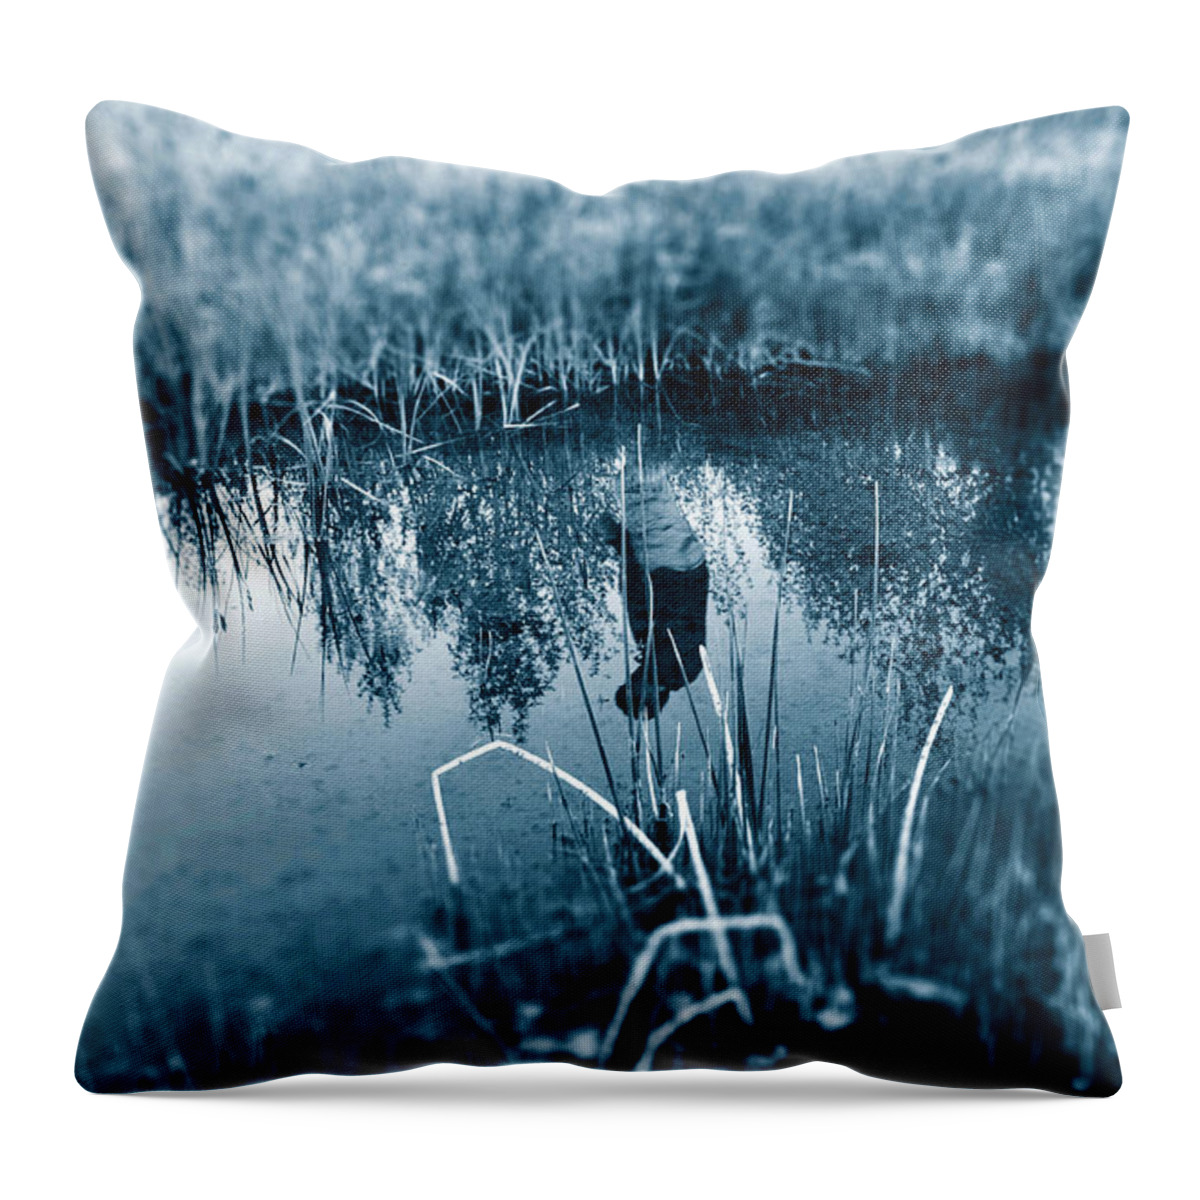 River Throw Pillow featuring the photograph Life's Reflections by Lisa Holland-Gillem